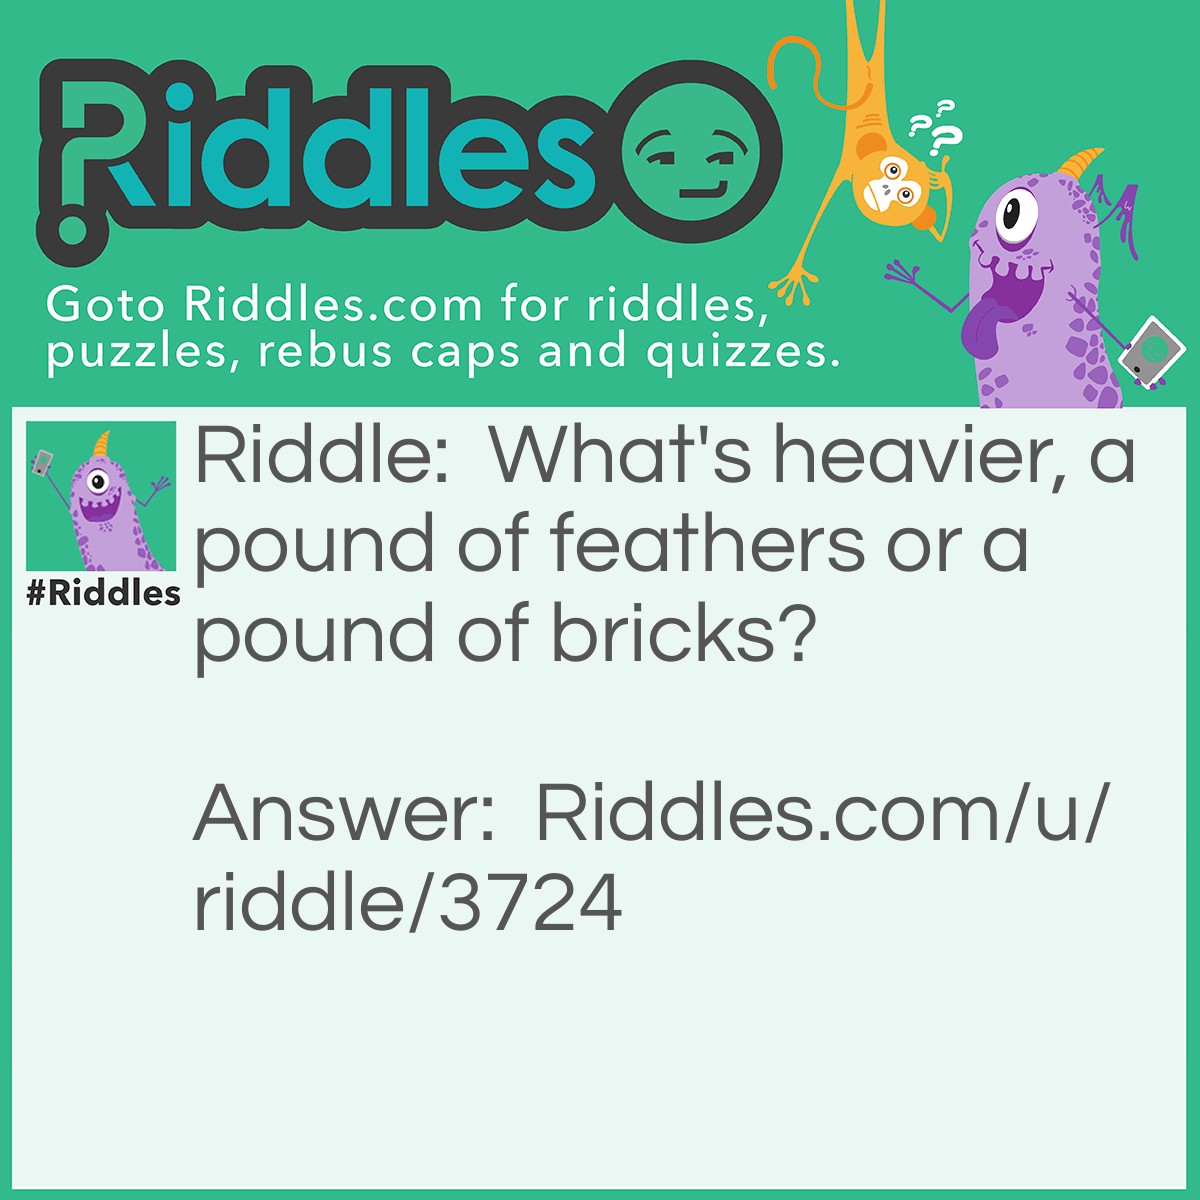 Riddle: What's heavier, a pound of feathers or a pound of bricks? Answer: They are the same amount.